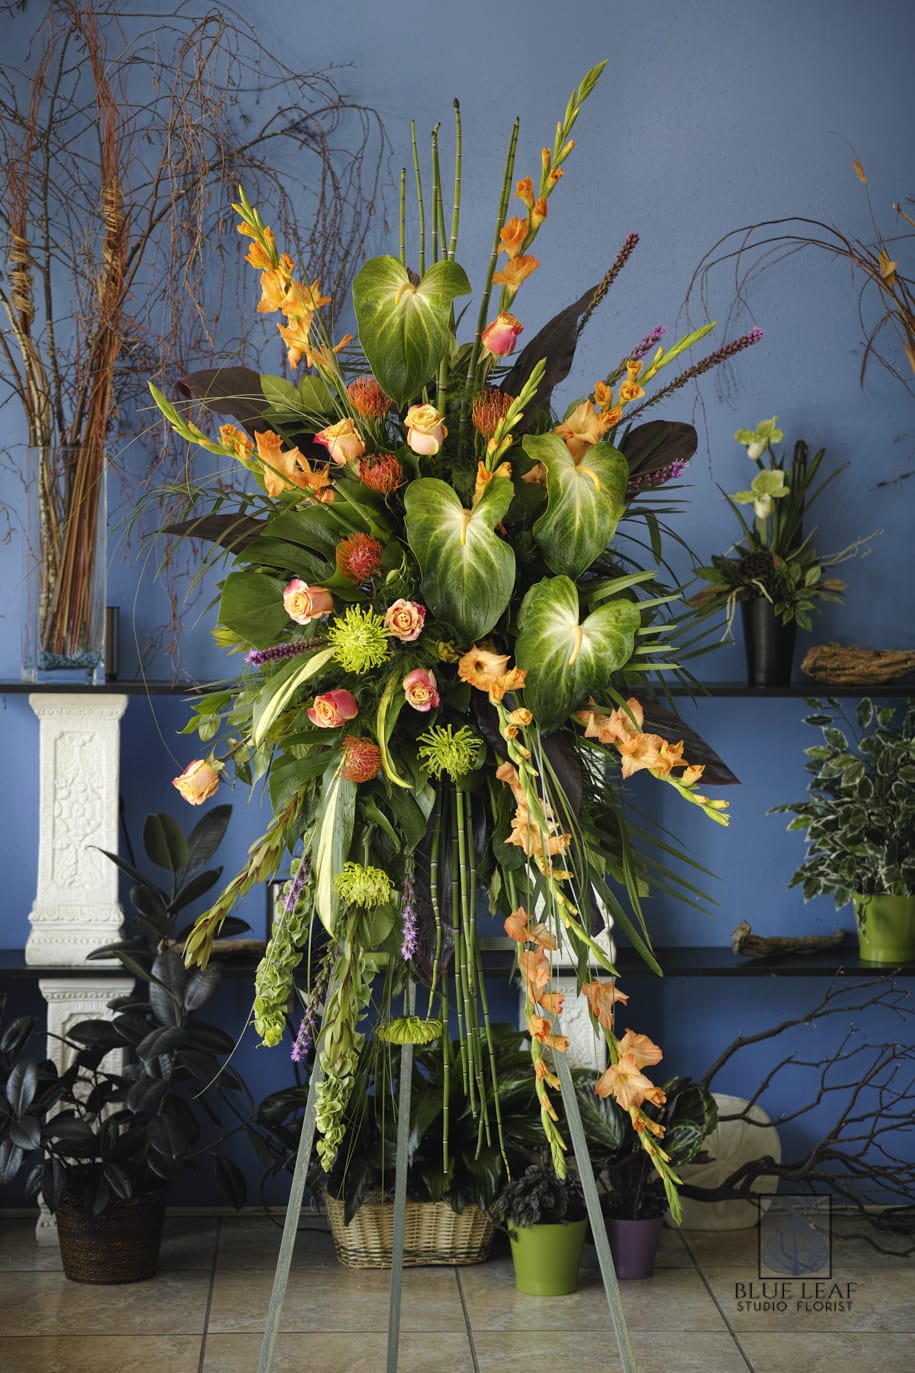 Tropic Tribute Easel Spray - A large contemporary style easel spray of tropical flowers and gladiolus.  Shown here with green anthurium, orange pincushion protea and roses. Please order 3 days prior, as some of these varieties are special order. Otherwise we will use available replacements in the same style. 